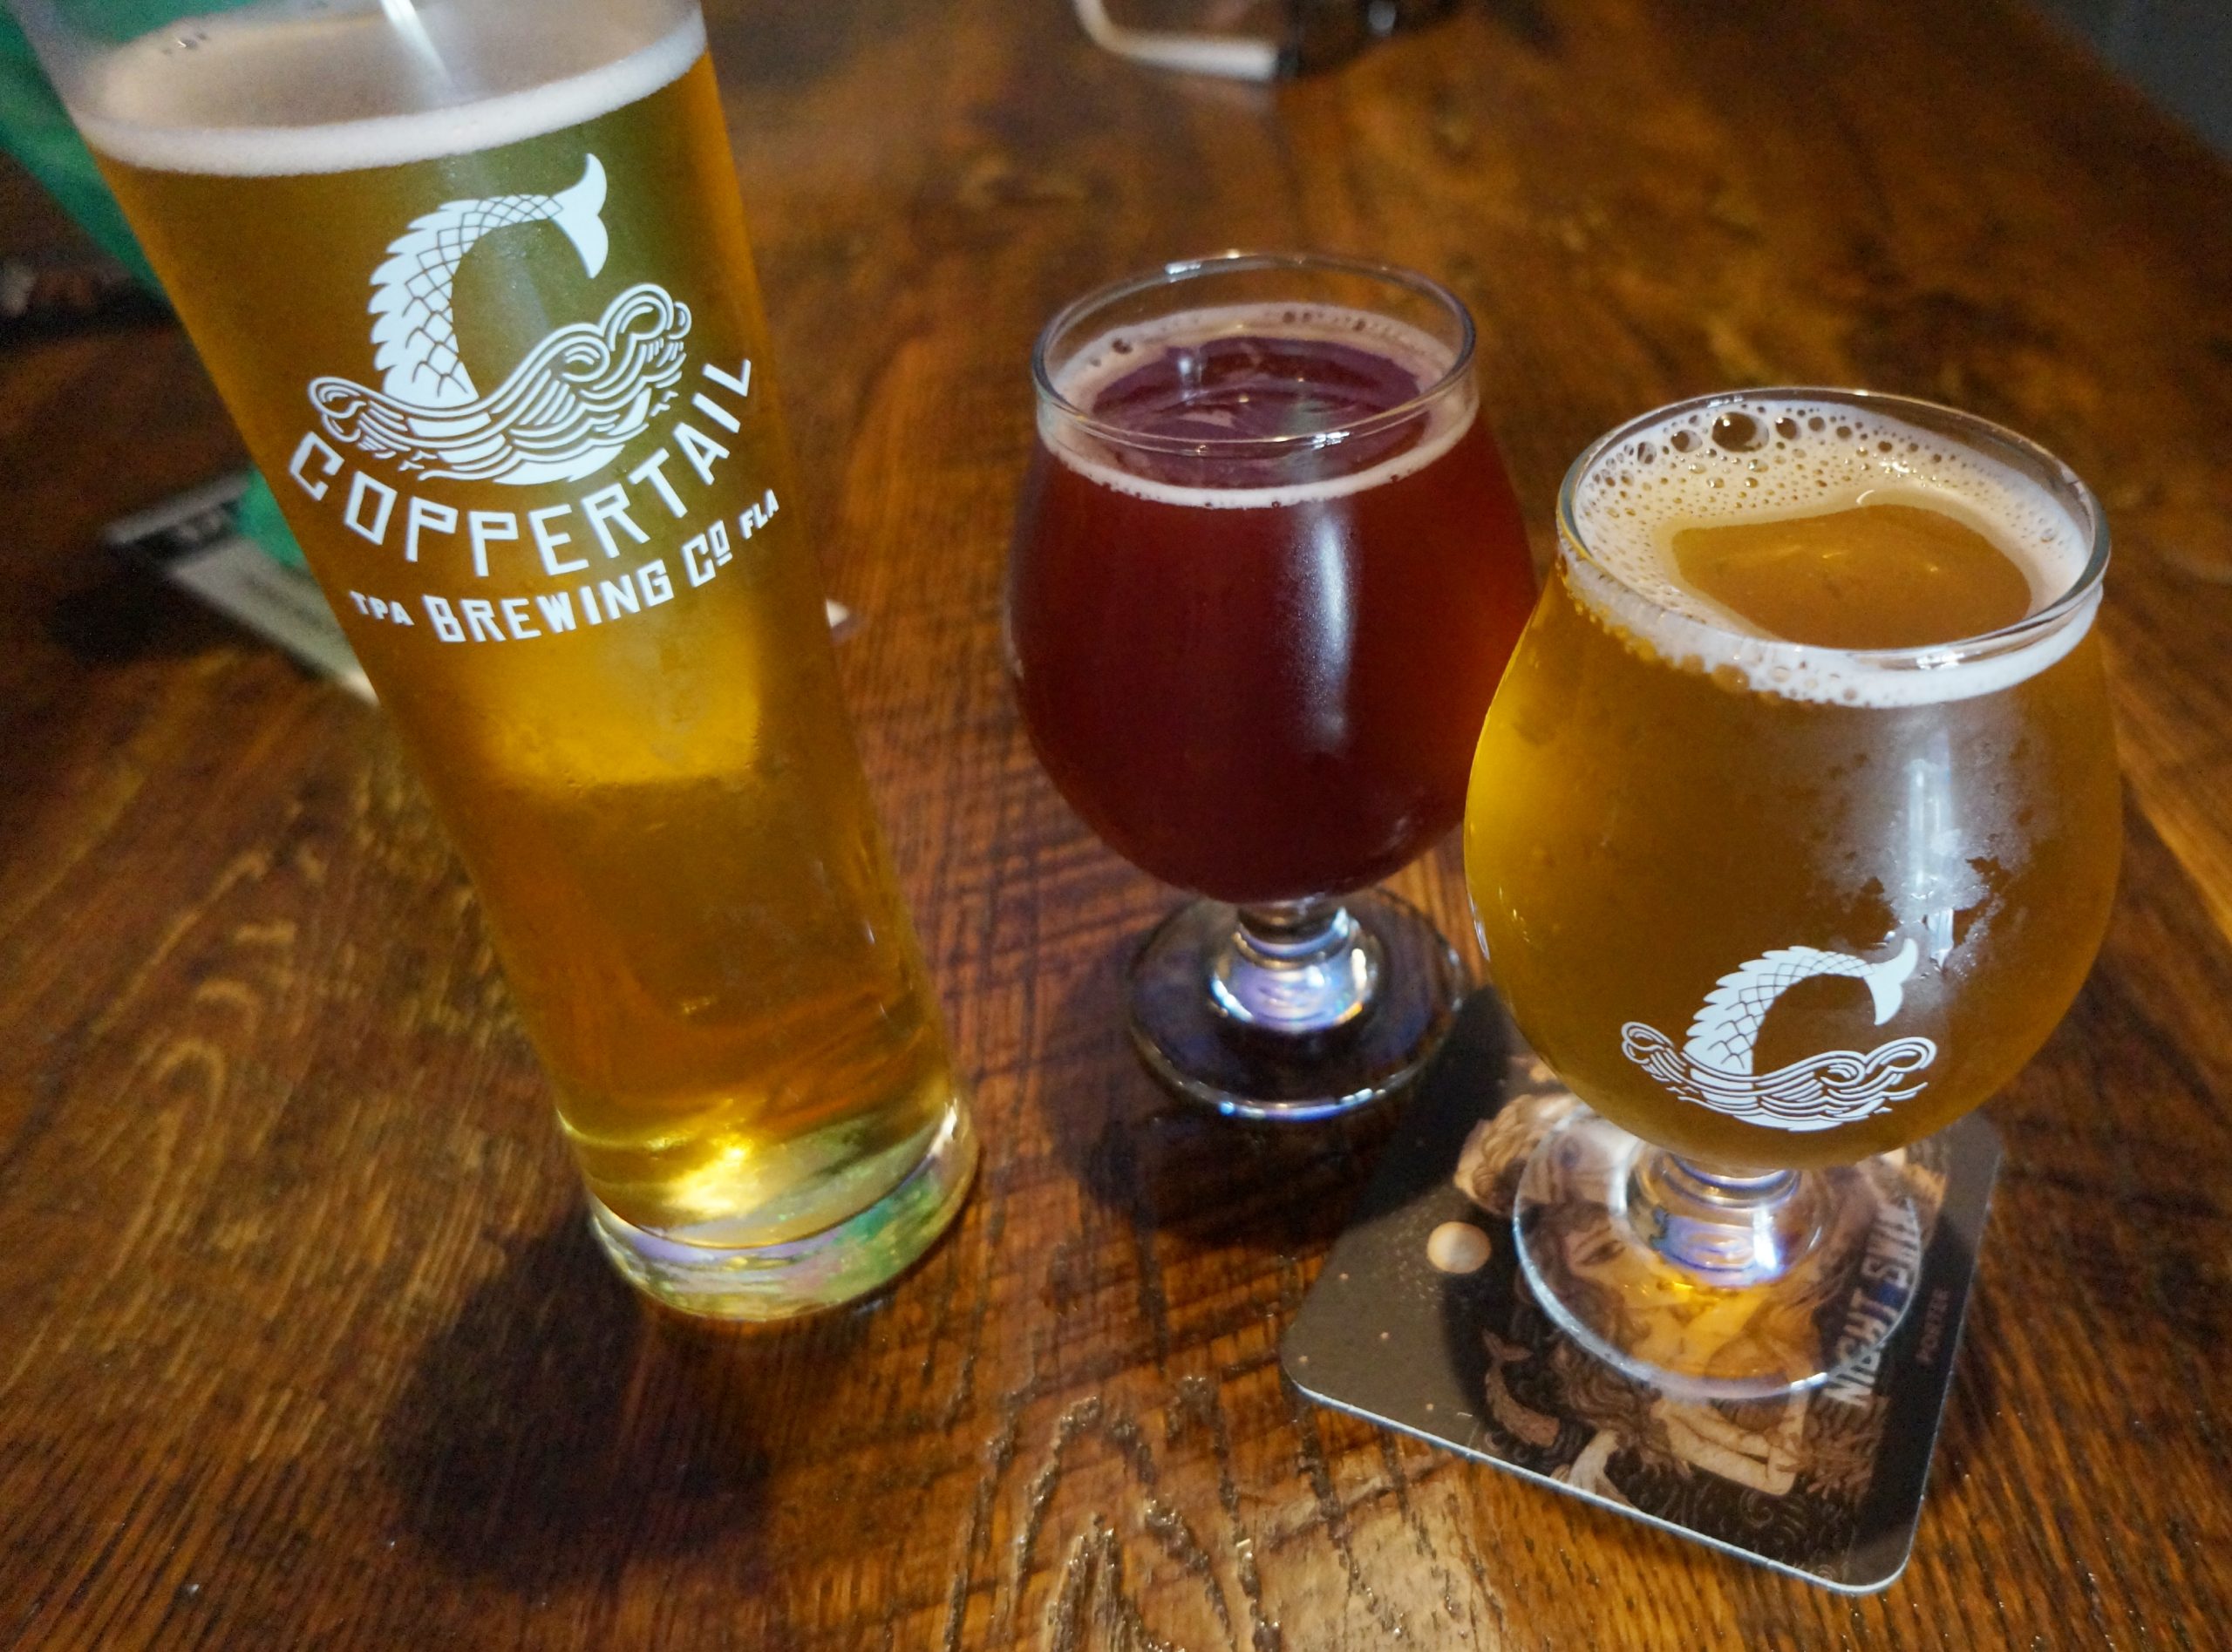 Coppertail Brewing Company in Tampa, Florida